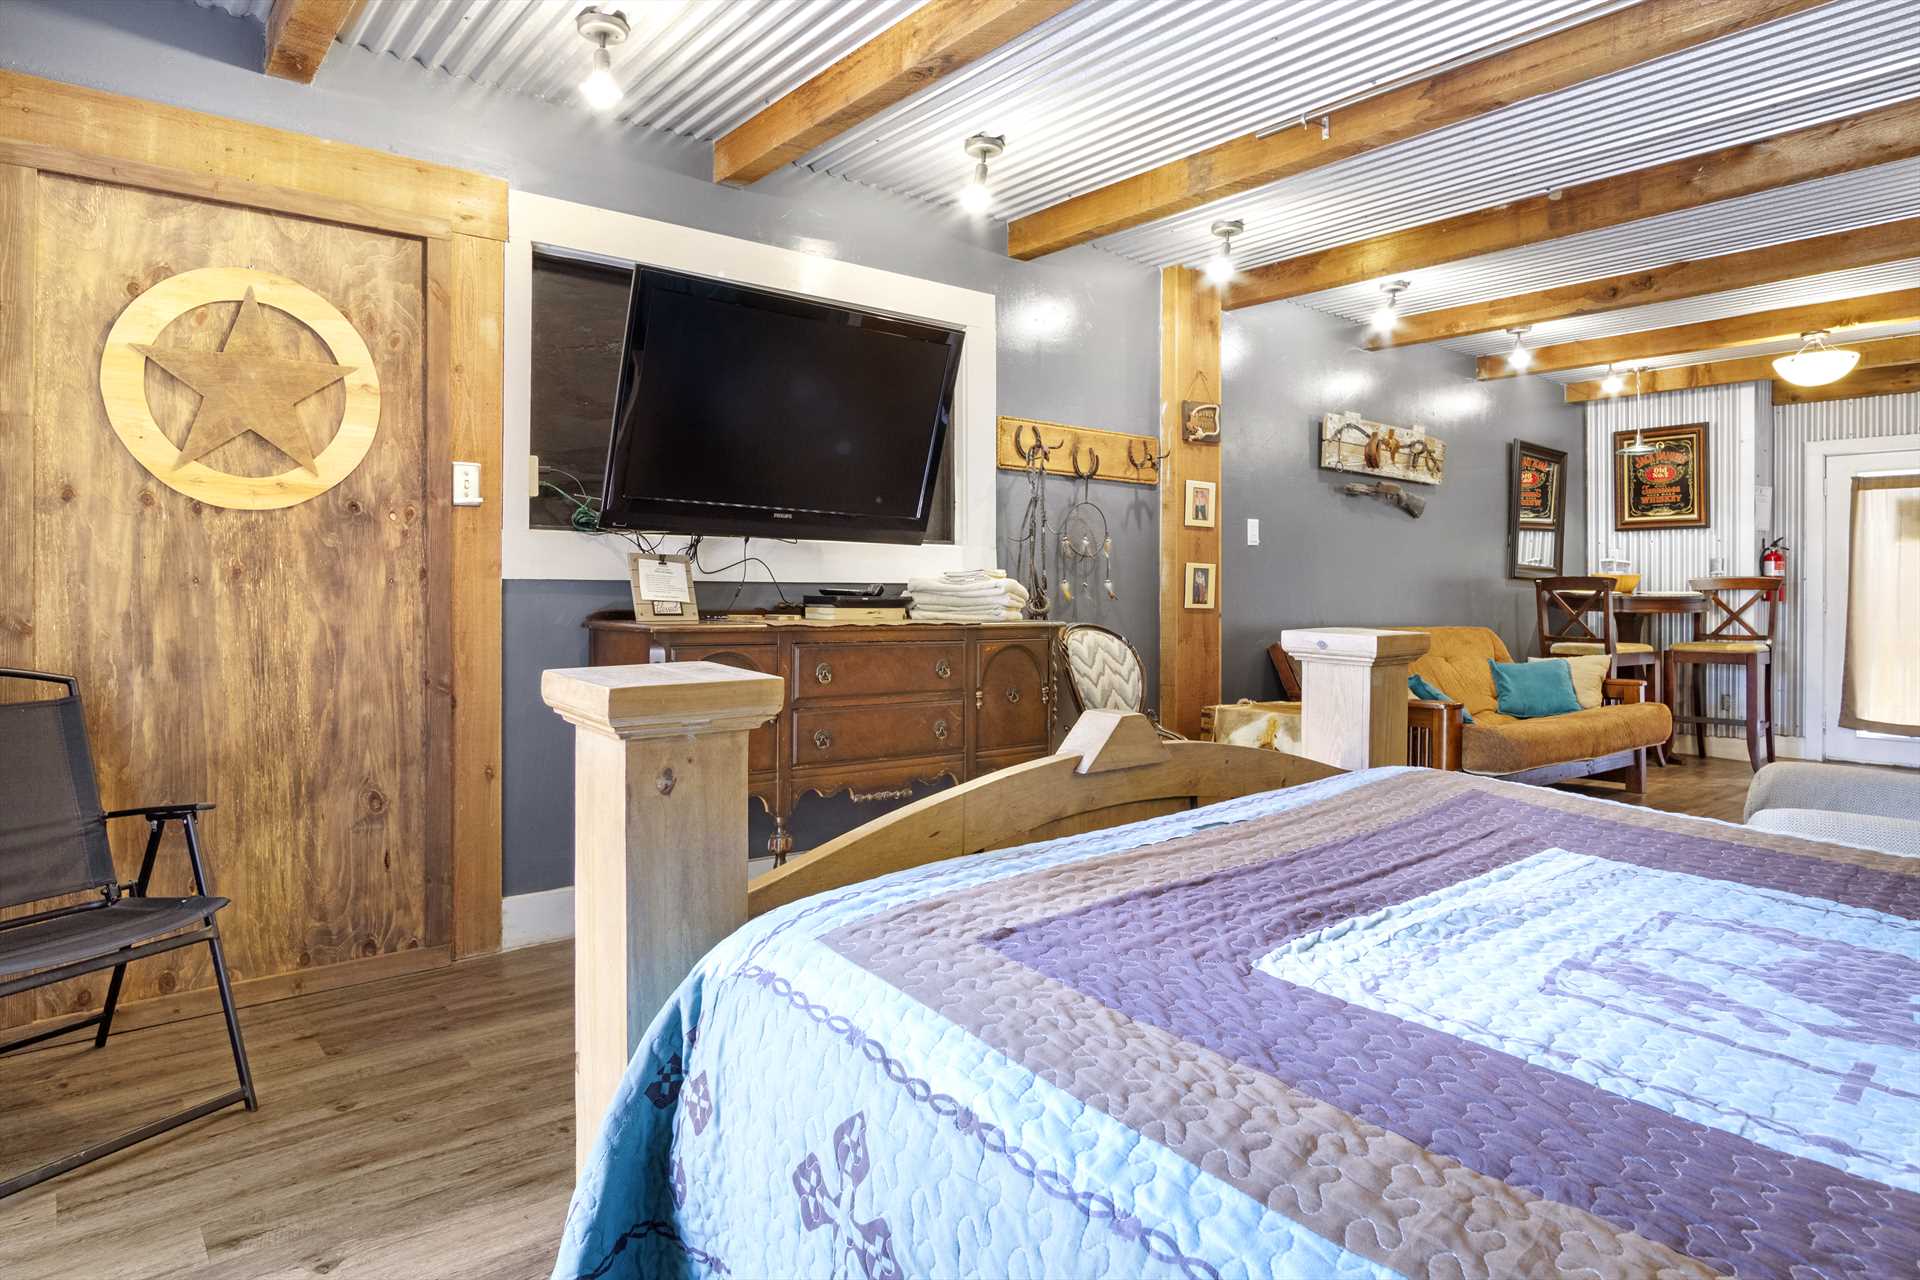                                                 The Hideaway Cabin's open and airy interior is kept just as you like it with efficient heat and AC units.